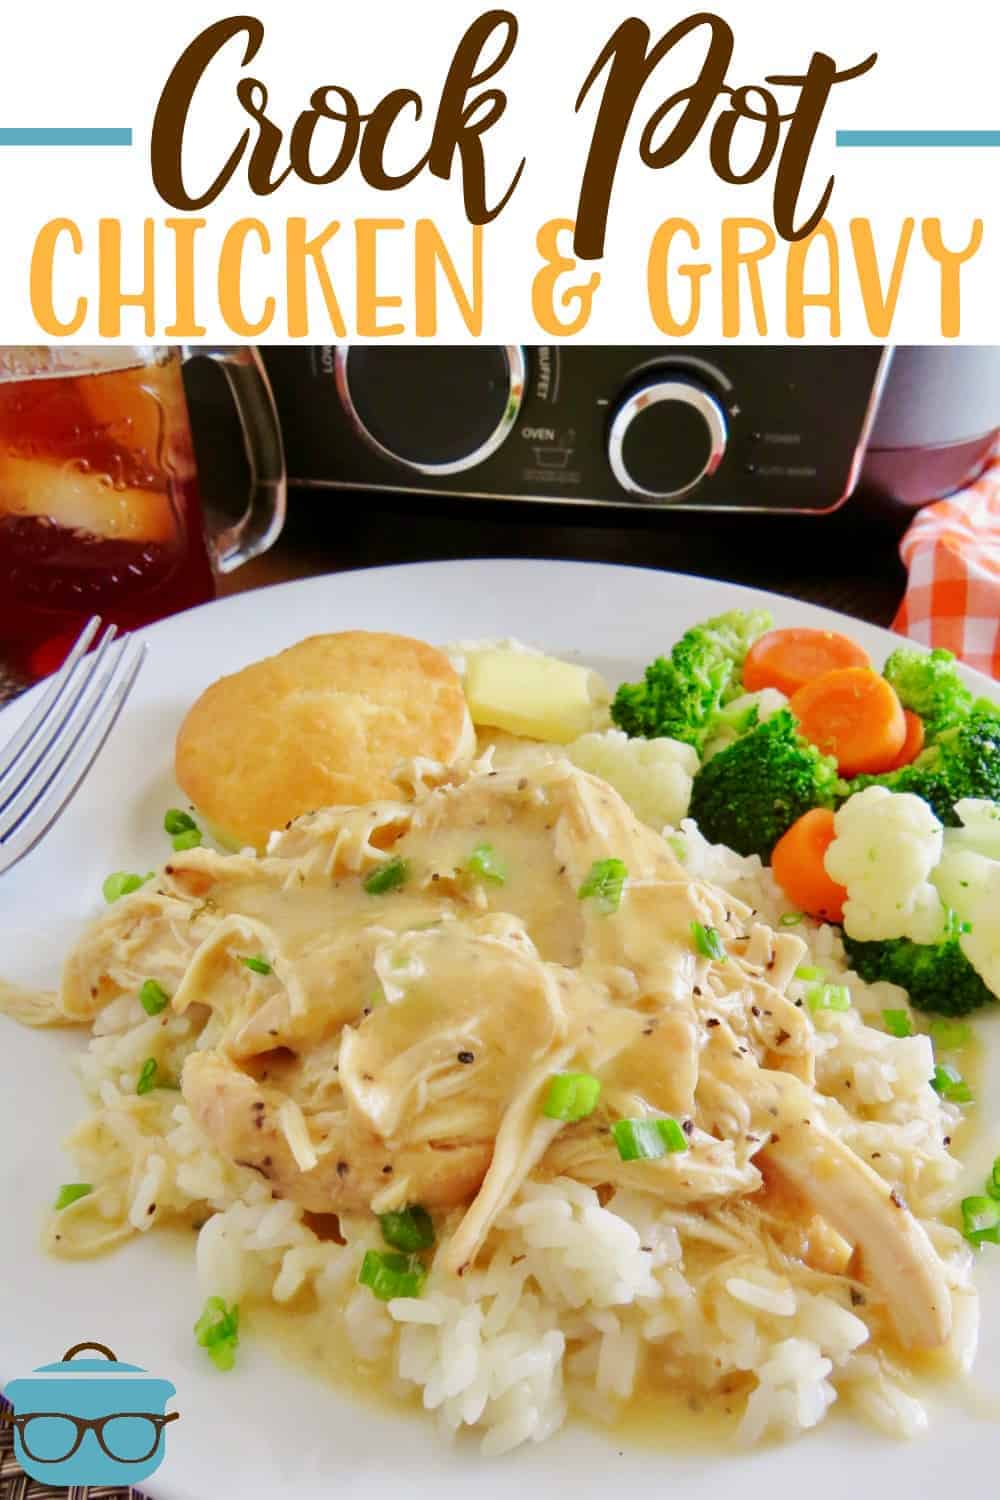 Crock Pot Chicken and Gravy recipe from The Country Cook, white plate shown topped with rice, steamed vegetables and creamy chicken with gravy